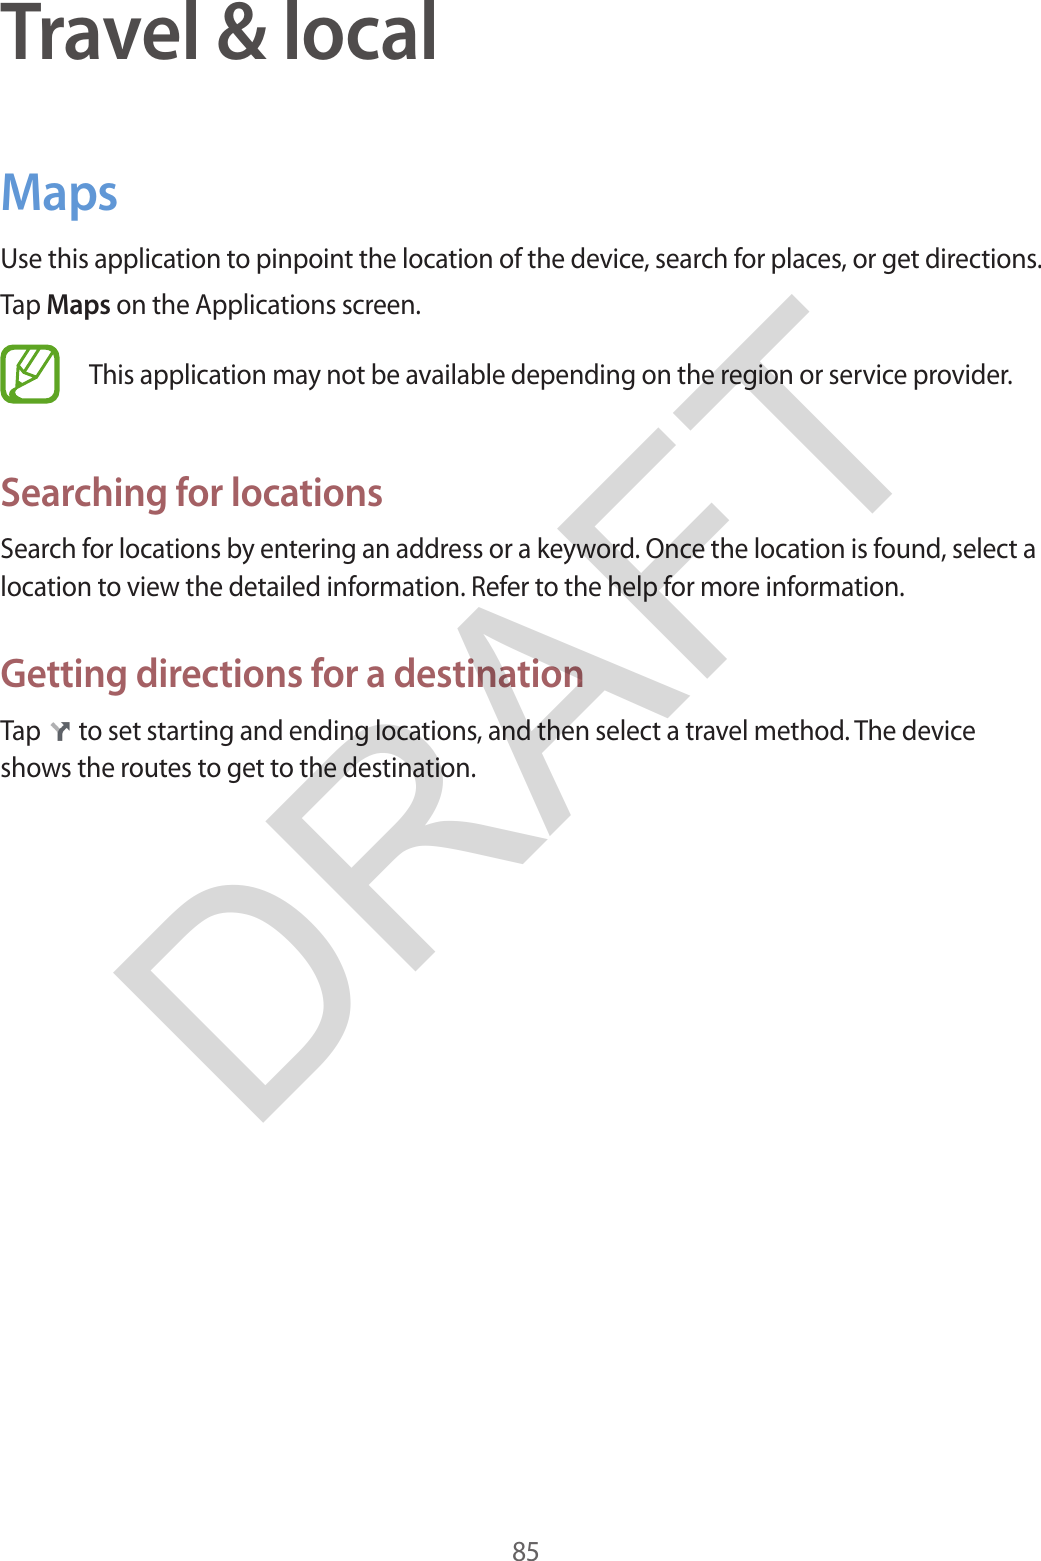 85Travel &amp; localMapsUse this application to pinpoint the location of the device, search for places, or get directions.Tap Maps on the Applications screen.This application may not be available depending on the region or service provider.Searching for locationsSearch for locations by entering an address or a keyword. Once the location is found, select a location to view the detailed information. Refer to the help for more information.Getting directions for a destinationTap   to set starting and ending locations, and then select a travel method. The device shows the routes to get to the destination.DRAFT